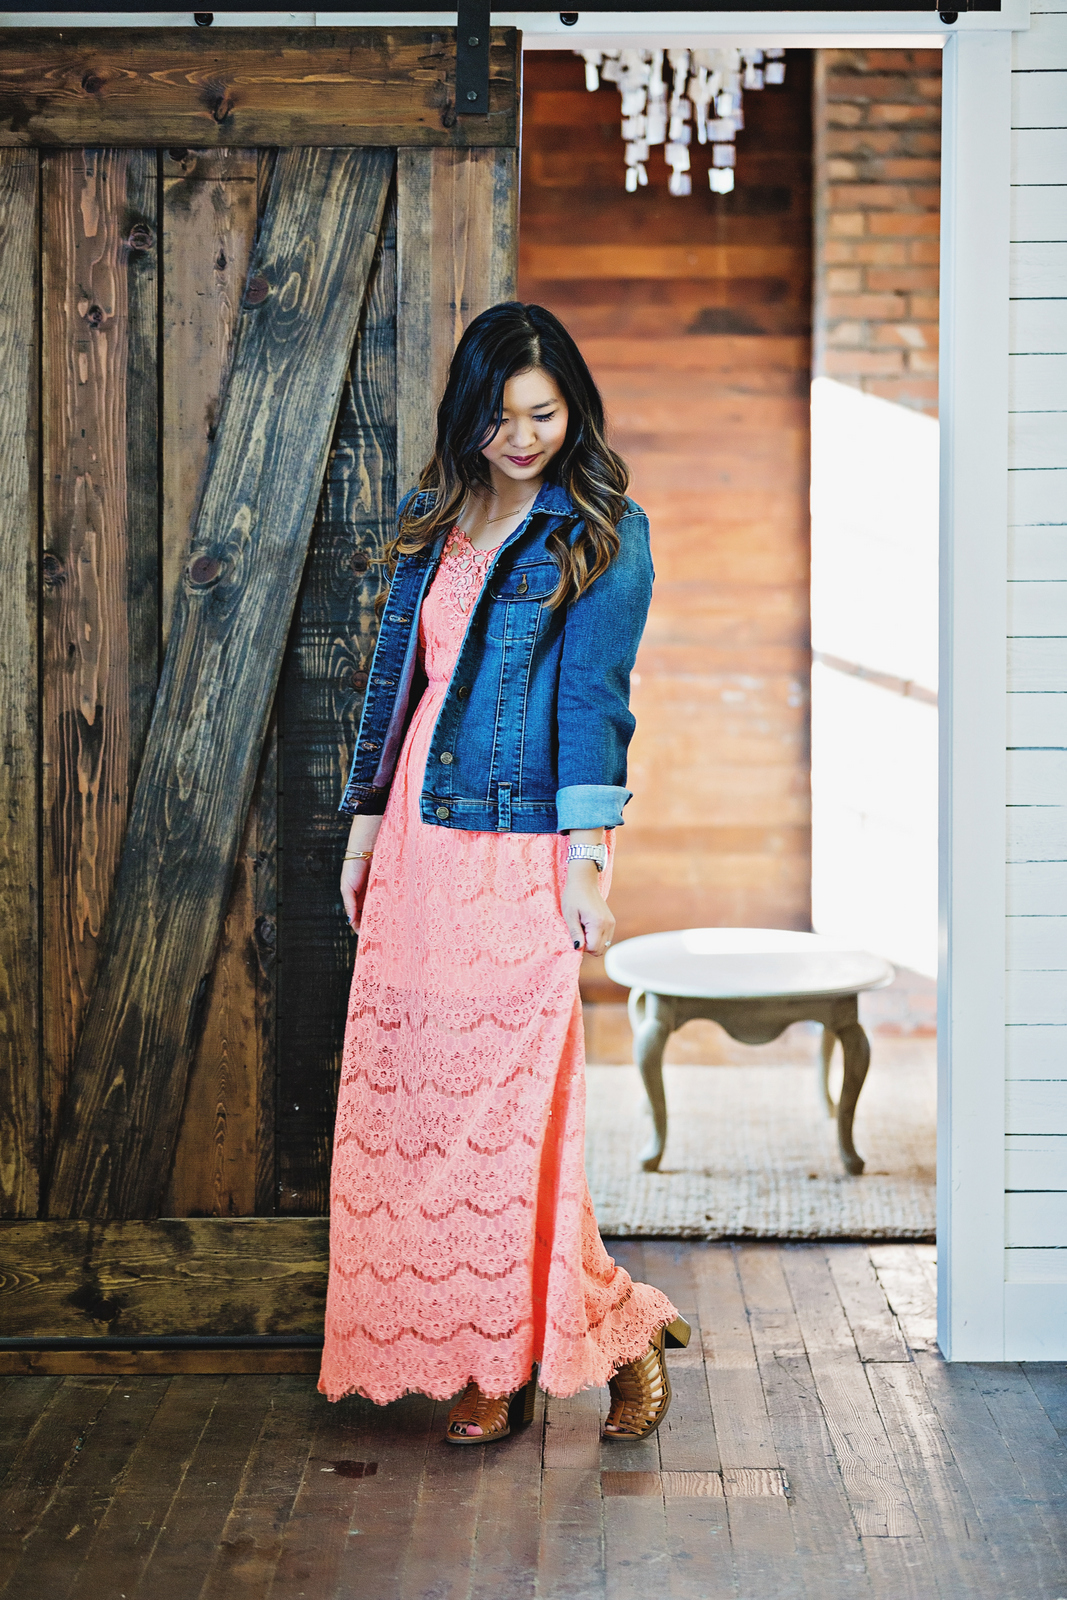 Lace dress and jean jacket